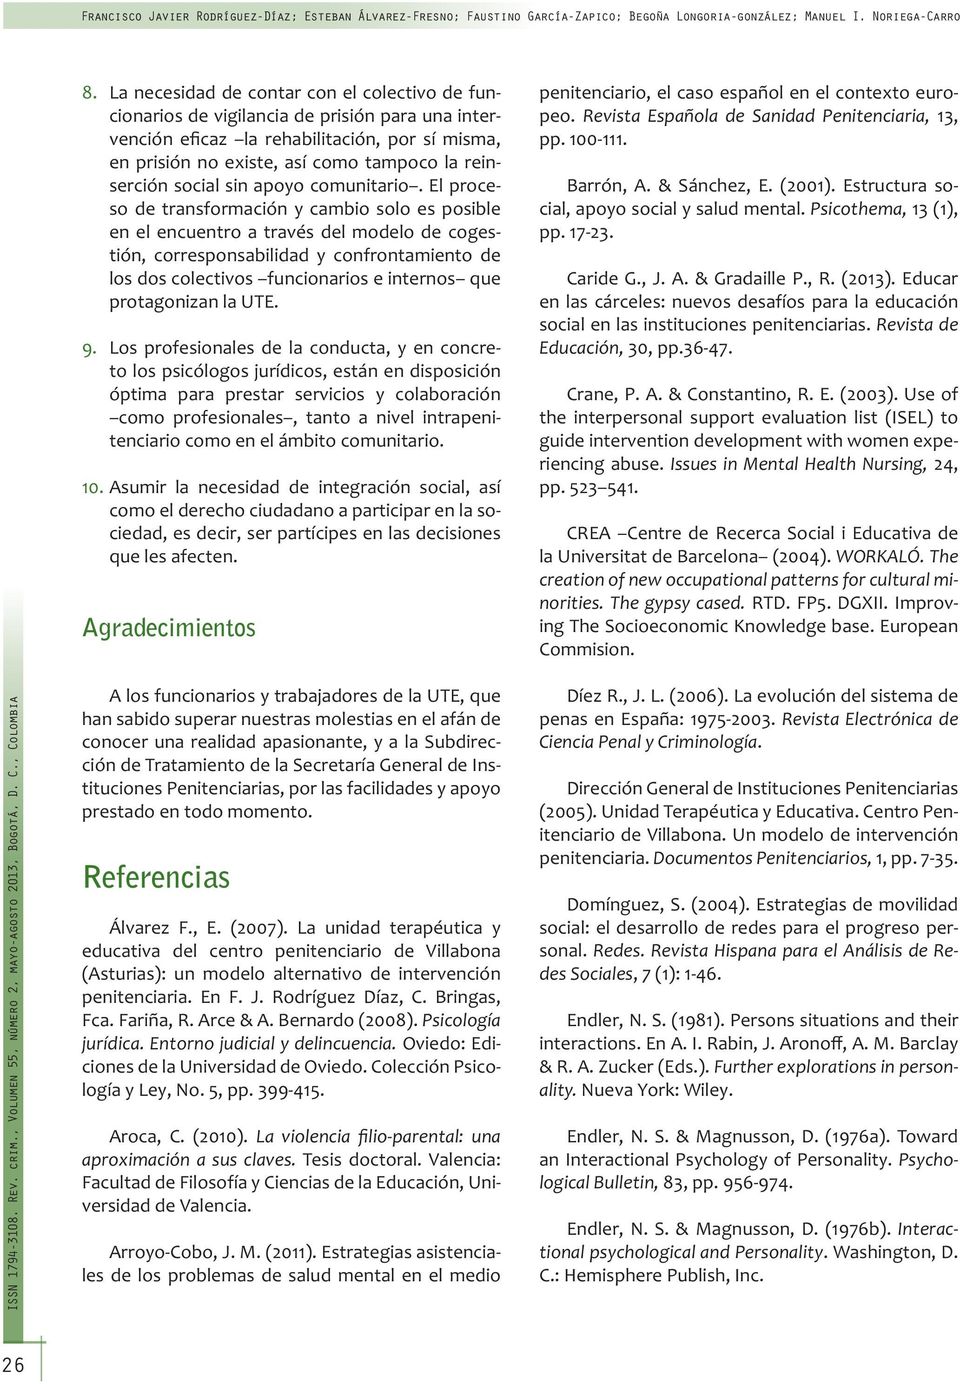 Revista de Educación, the interpersonal support evaluation list (ISEL) to WORKALÓ. The creation of new occupational patterns for cultural minorities. The gypsy cased. Commision.